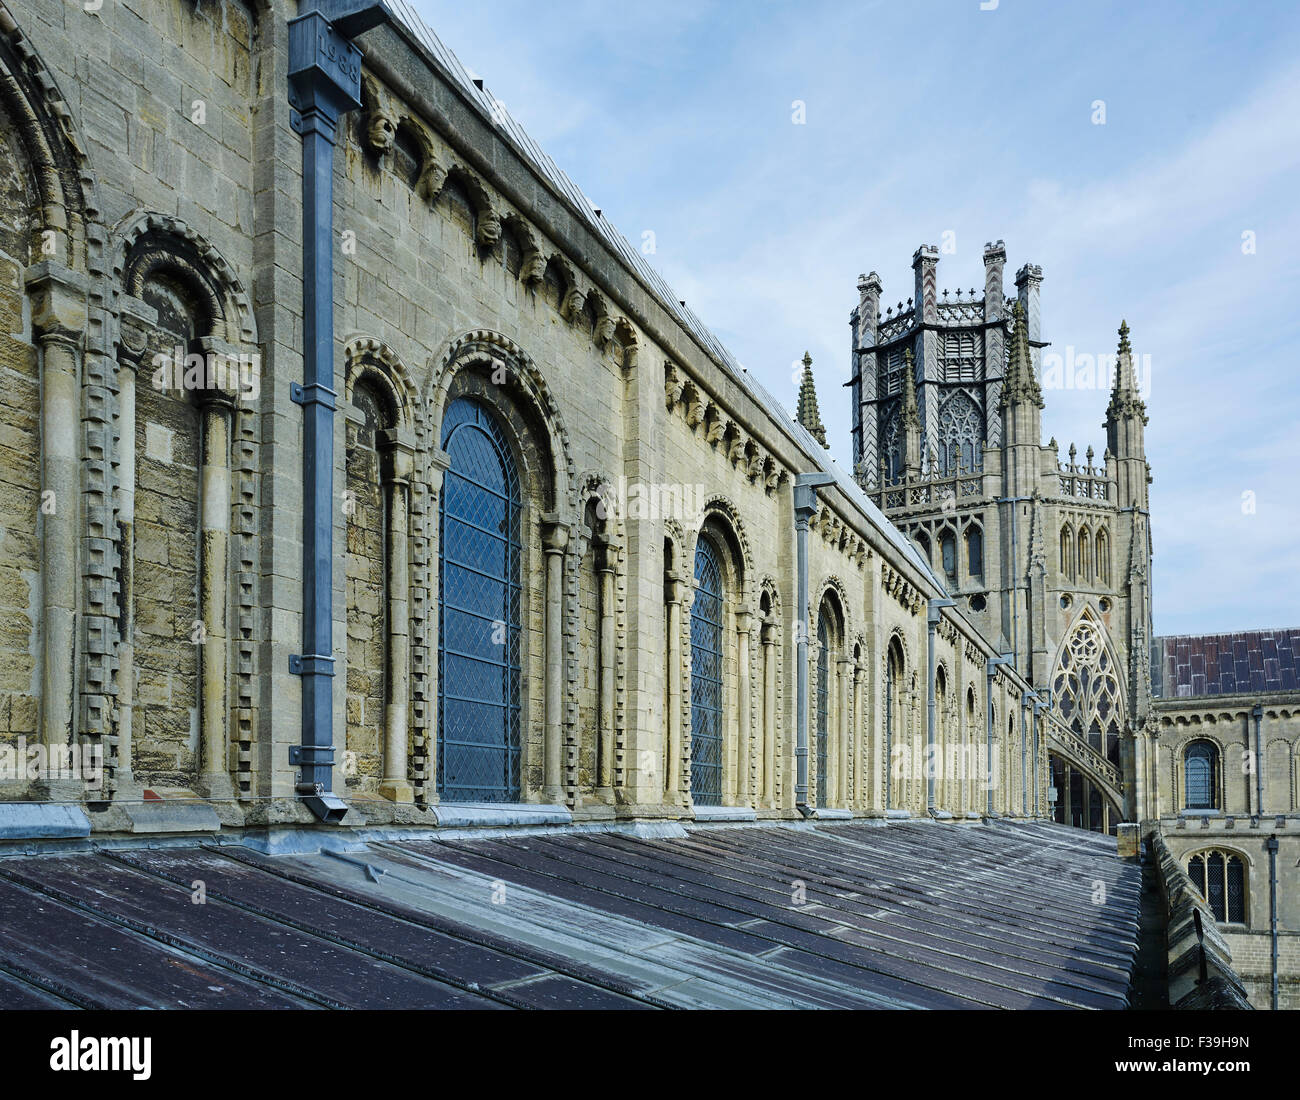 Ely Kathedrale Achteck aus Gang Dach Stockfoto